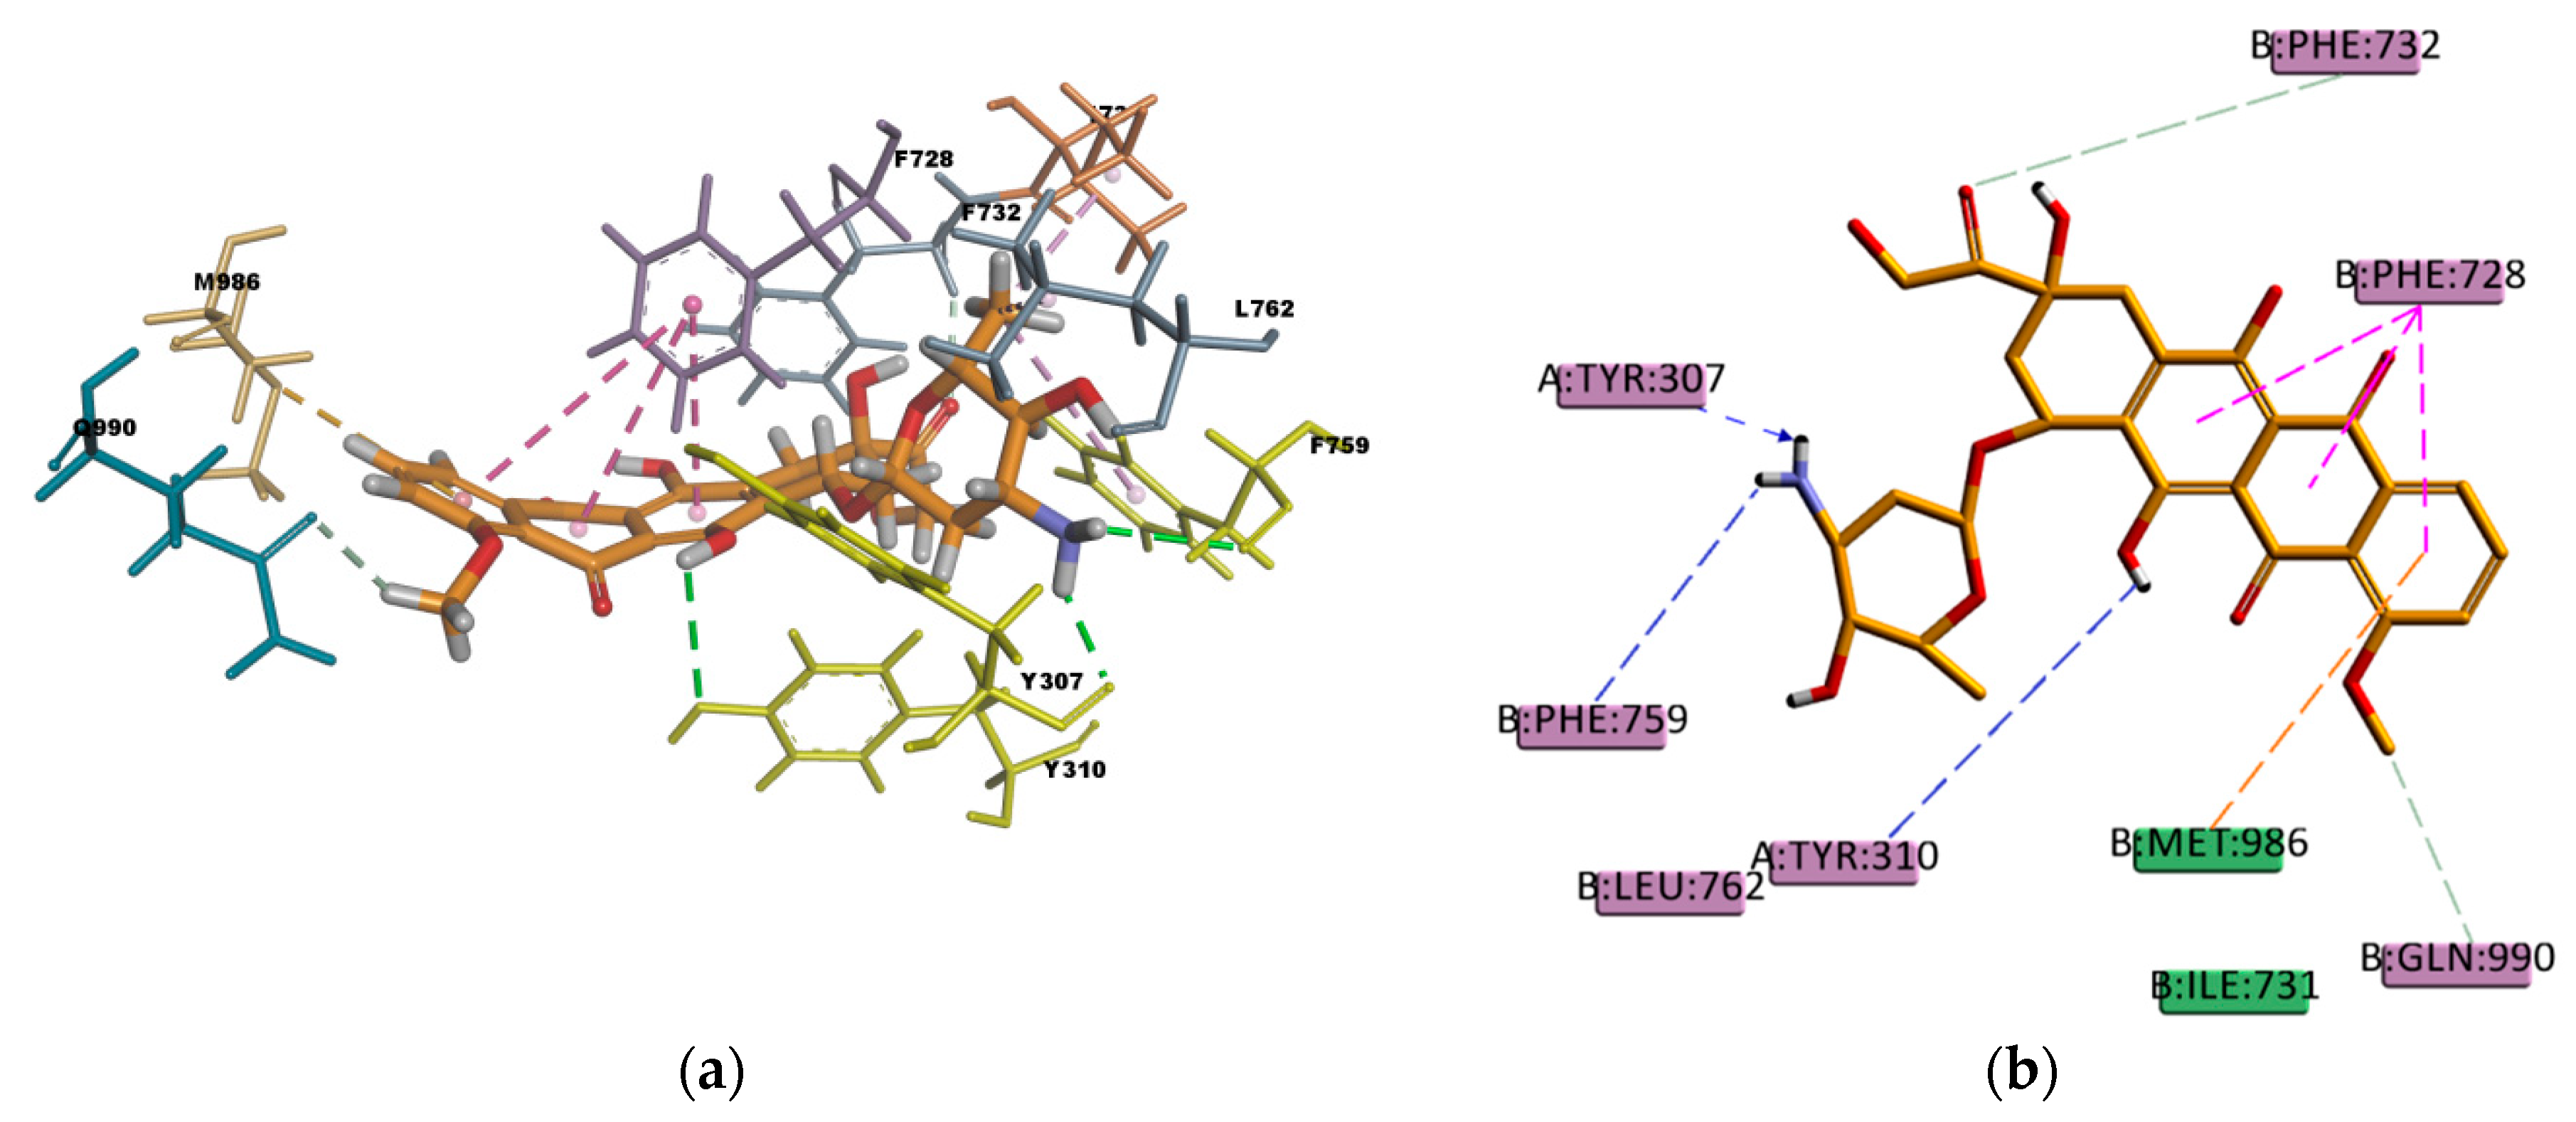 Ijms Free Full Text Homology Modeling Of The Human P Glycoprotein Abcb1 And Insights Into Ligand Binding Through Molecular Docking Studies Html